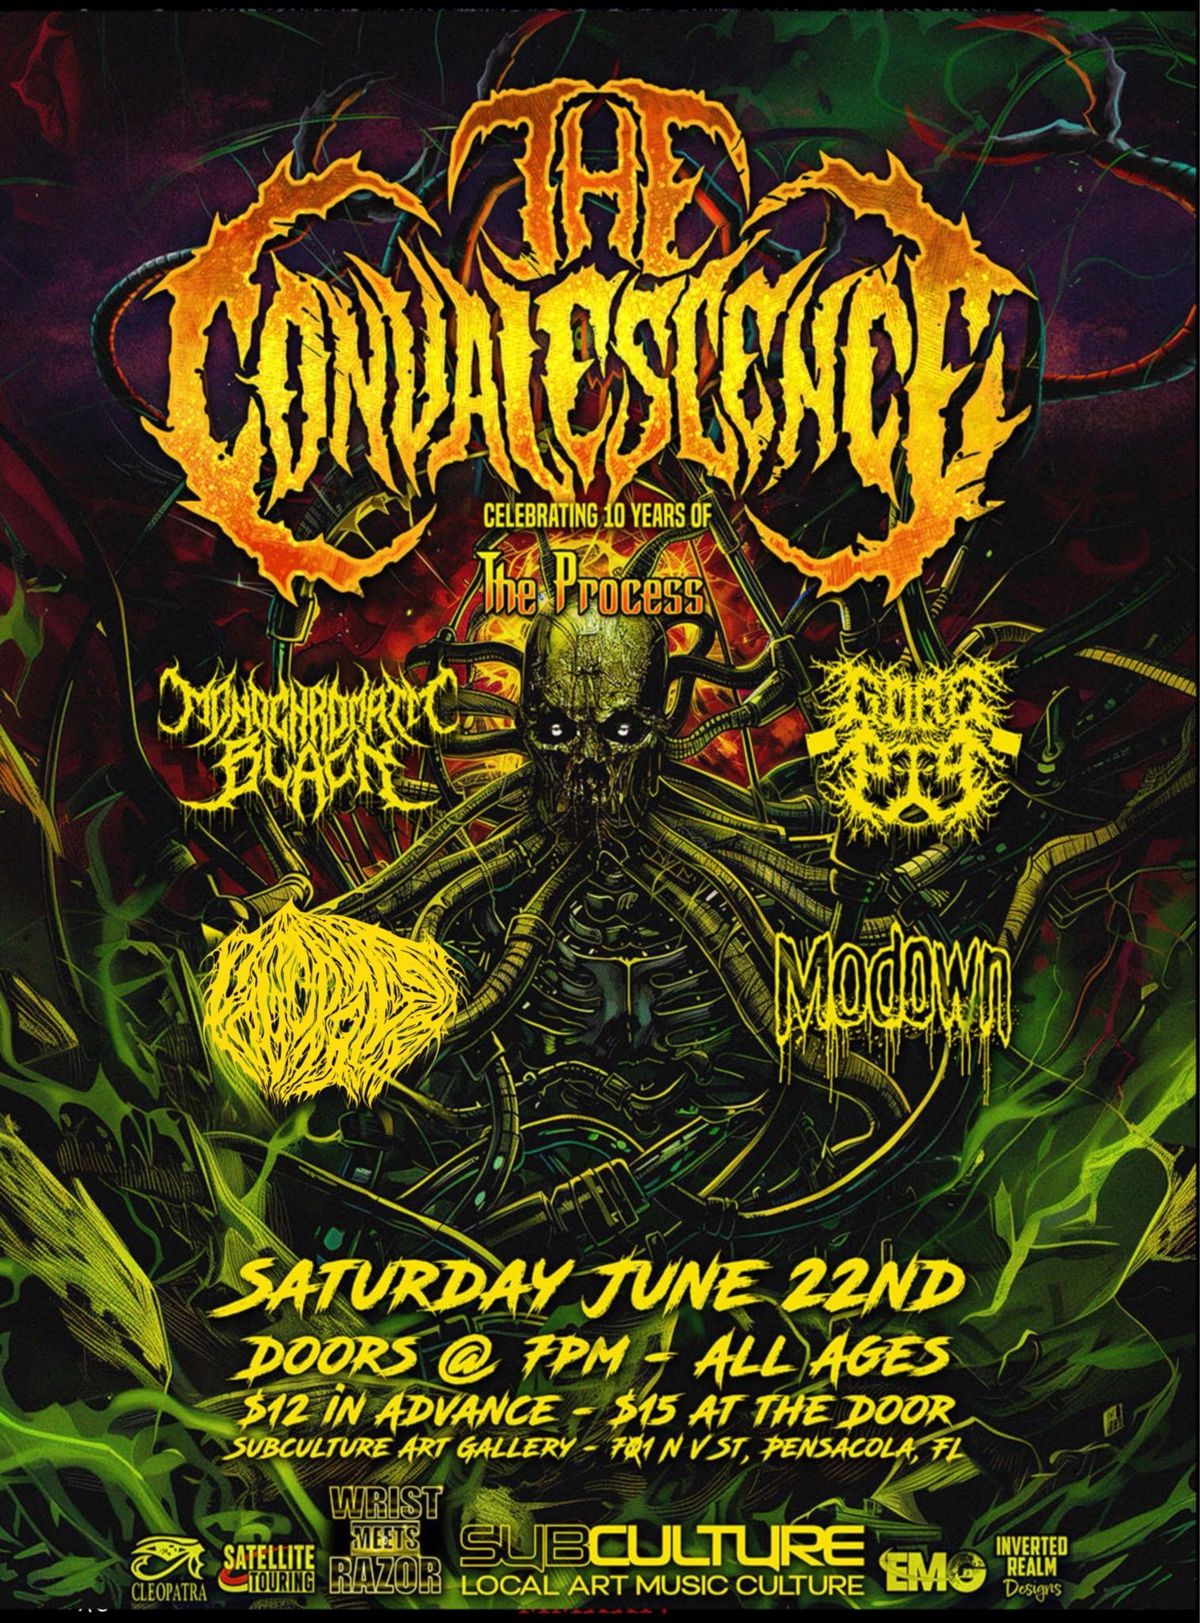 The Convalescence, Monochromatic Black, Gorepig, Fogcrawler, and Modown at Subculture Art Gallery